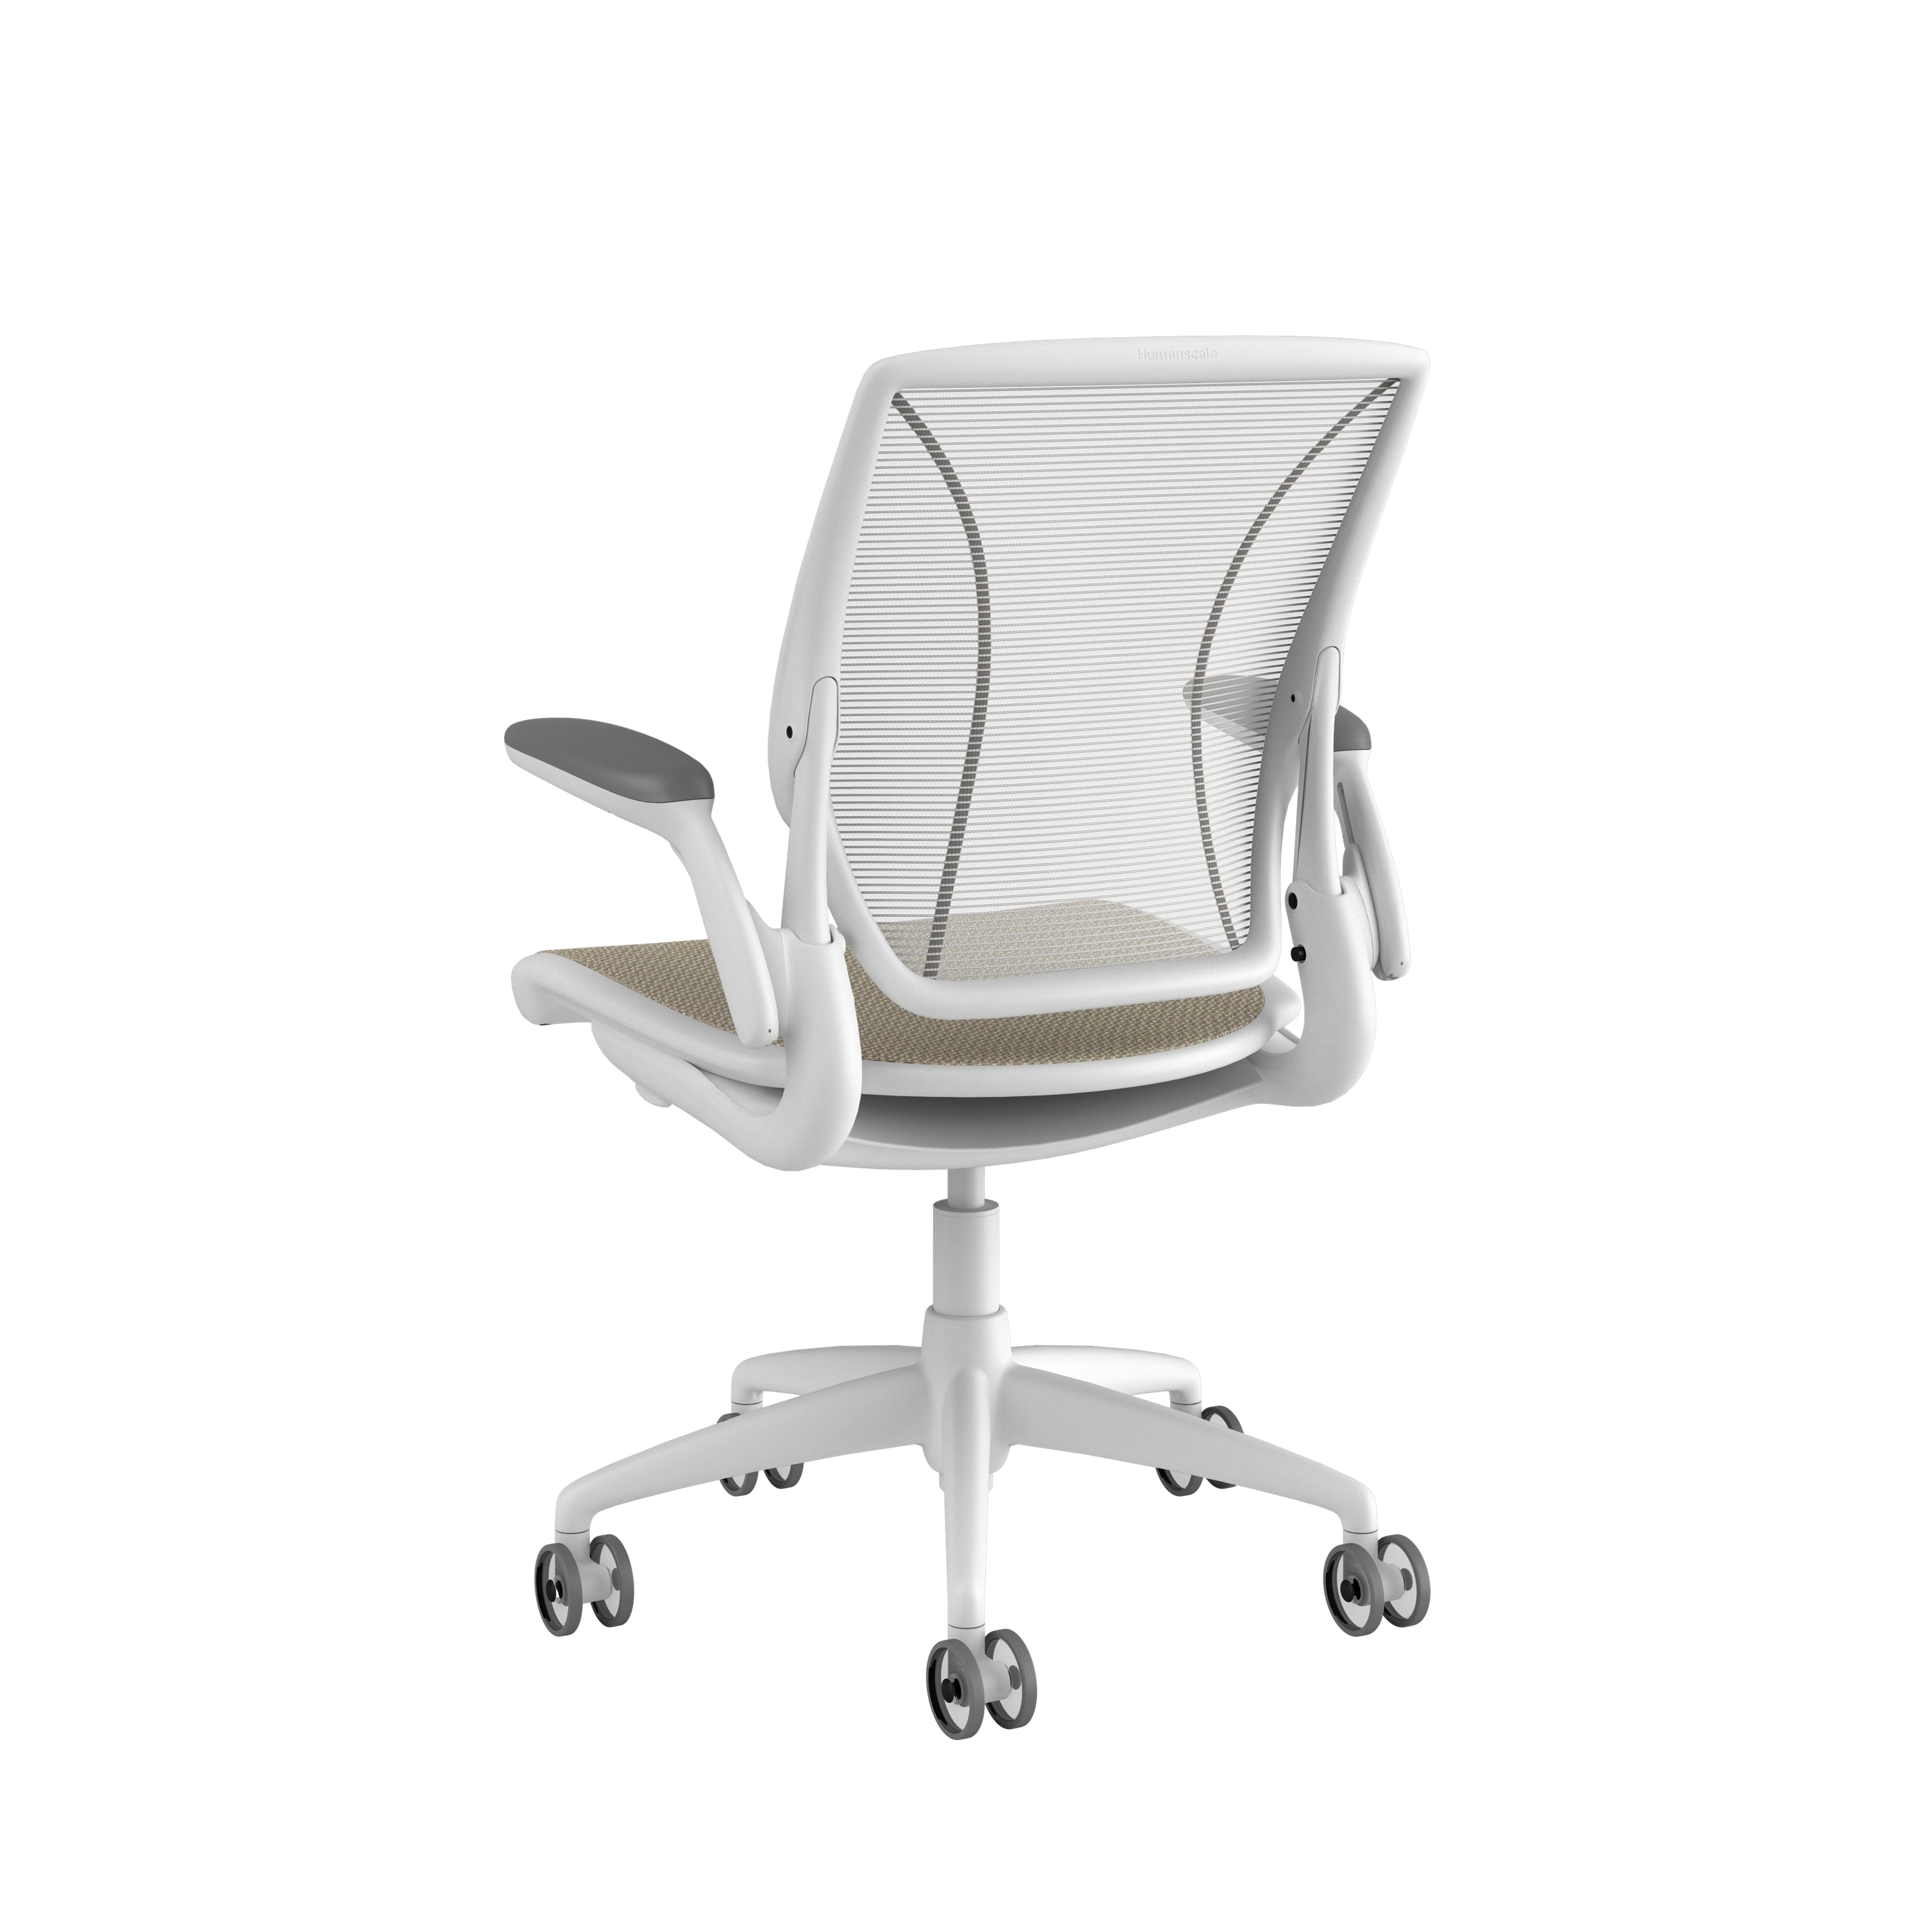 Humanscale World Chair White -Adj. Arms, soft casters, fabric seat